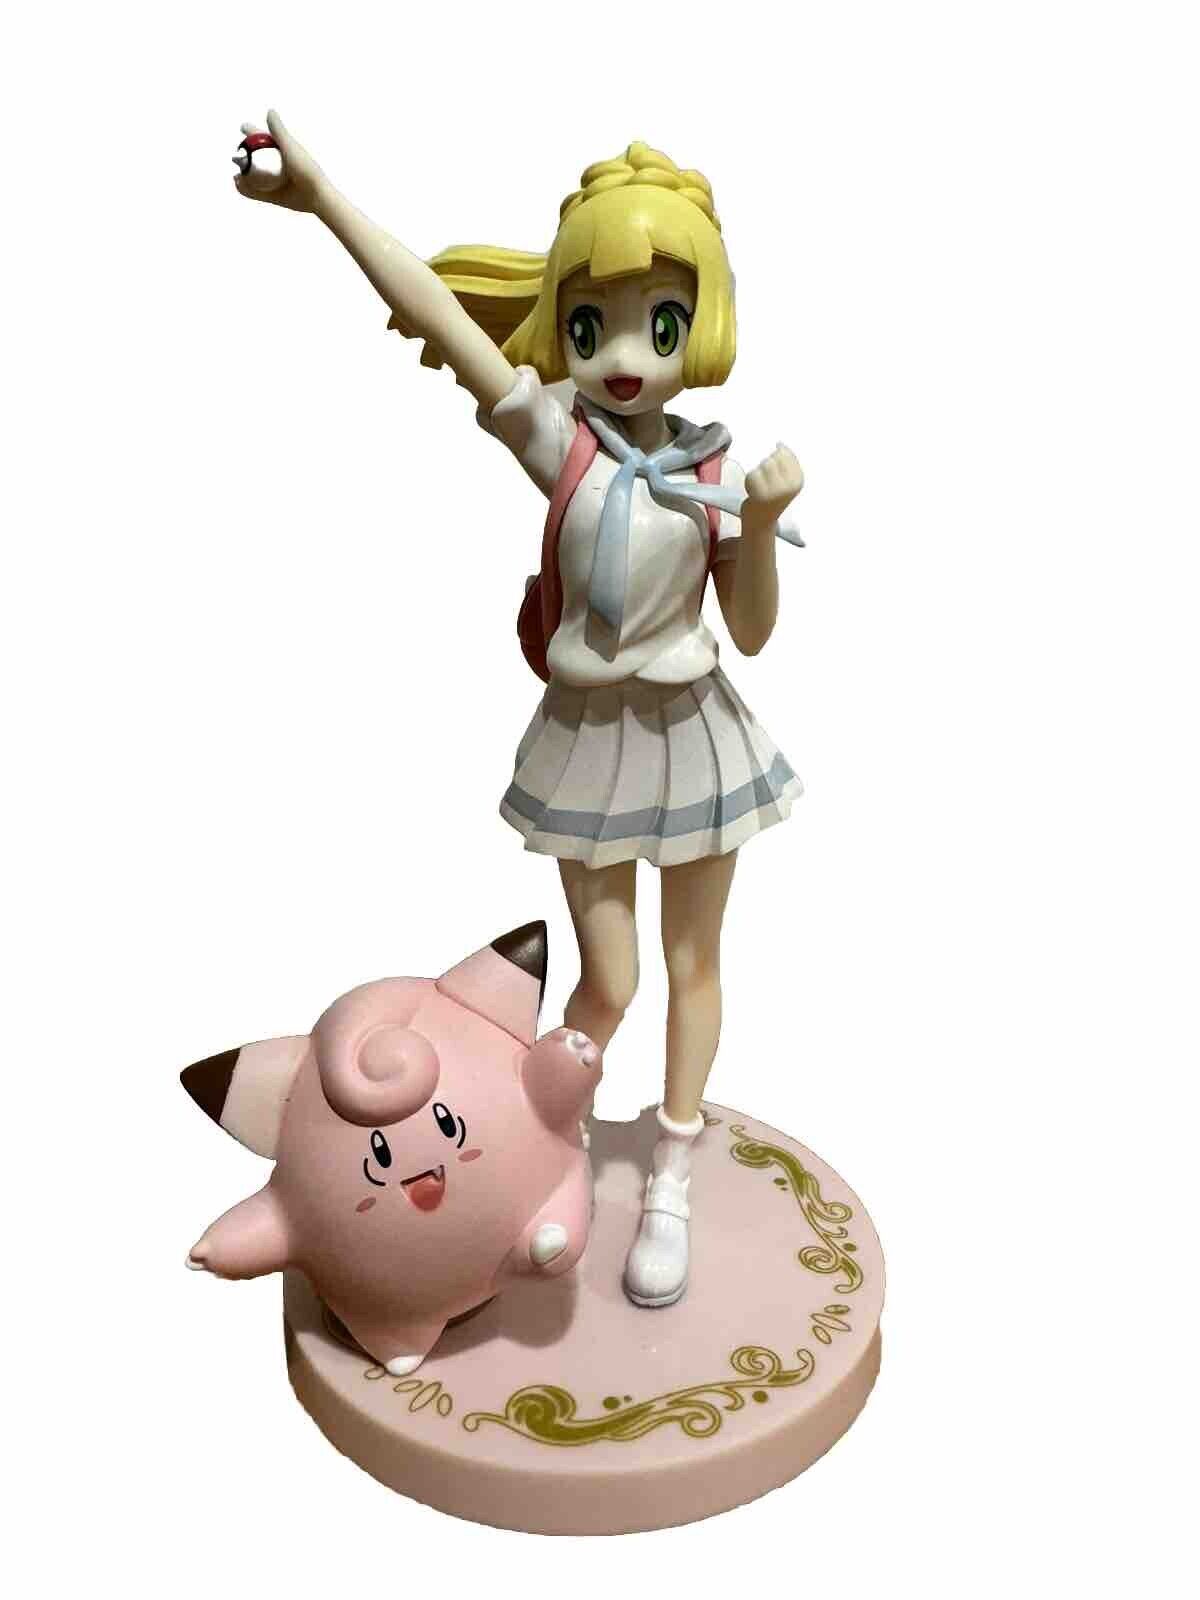 Pokemon Trainer Lillie & Clefairy Statue Figure Model Toy Anime Collectible